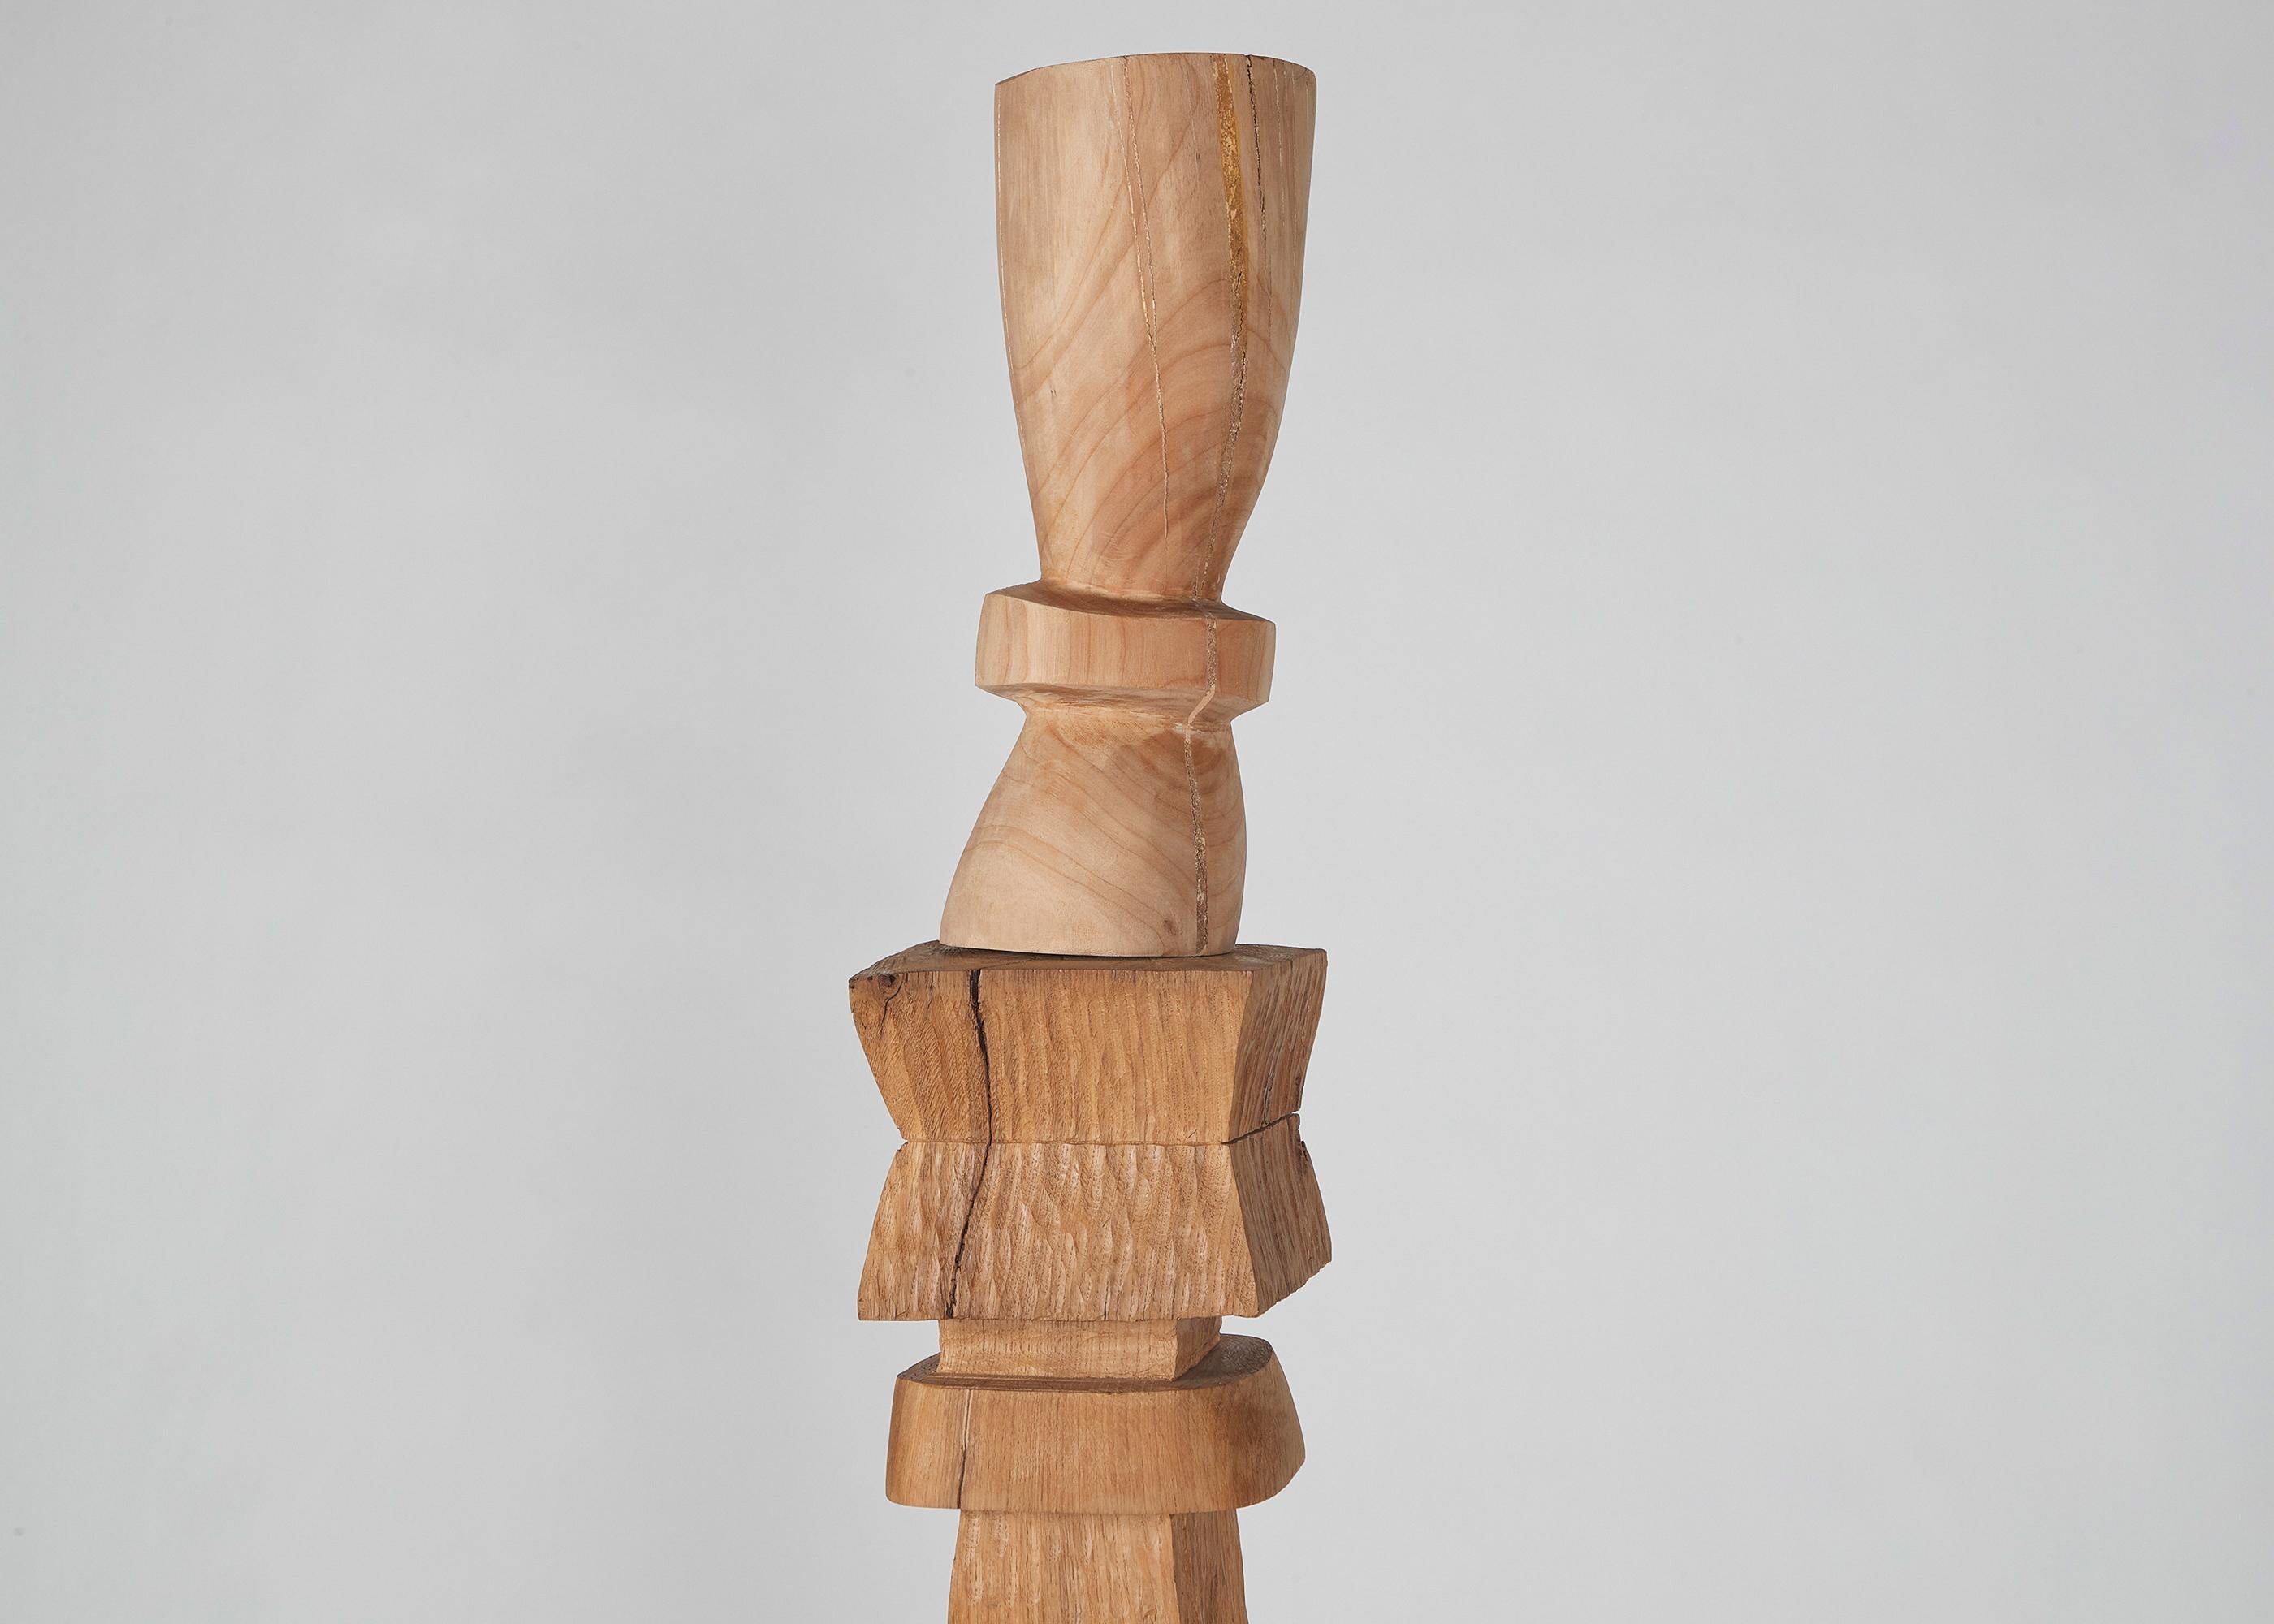 French Franck Evennou, Large-Scale Wooden TOTEM with Finial, France, 2020